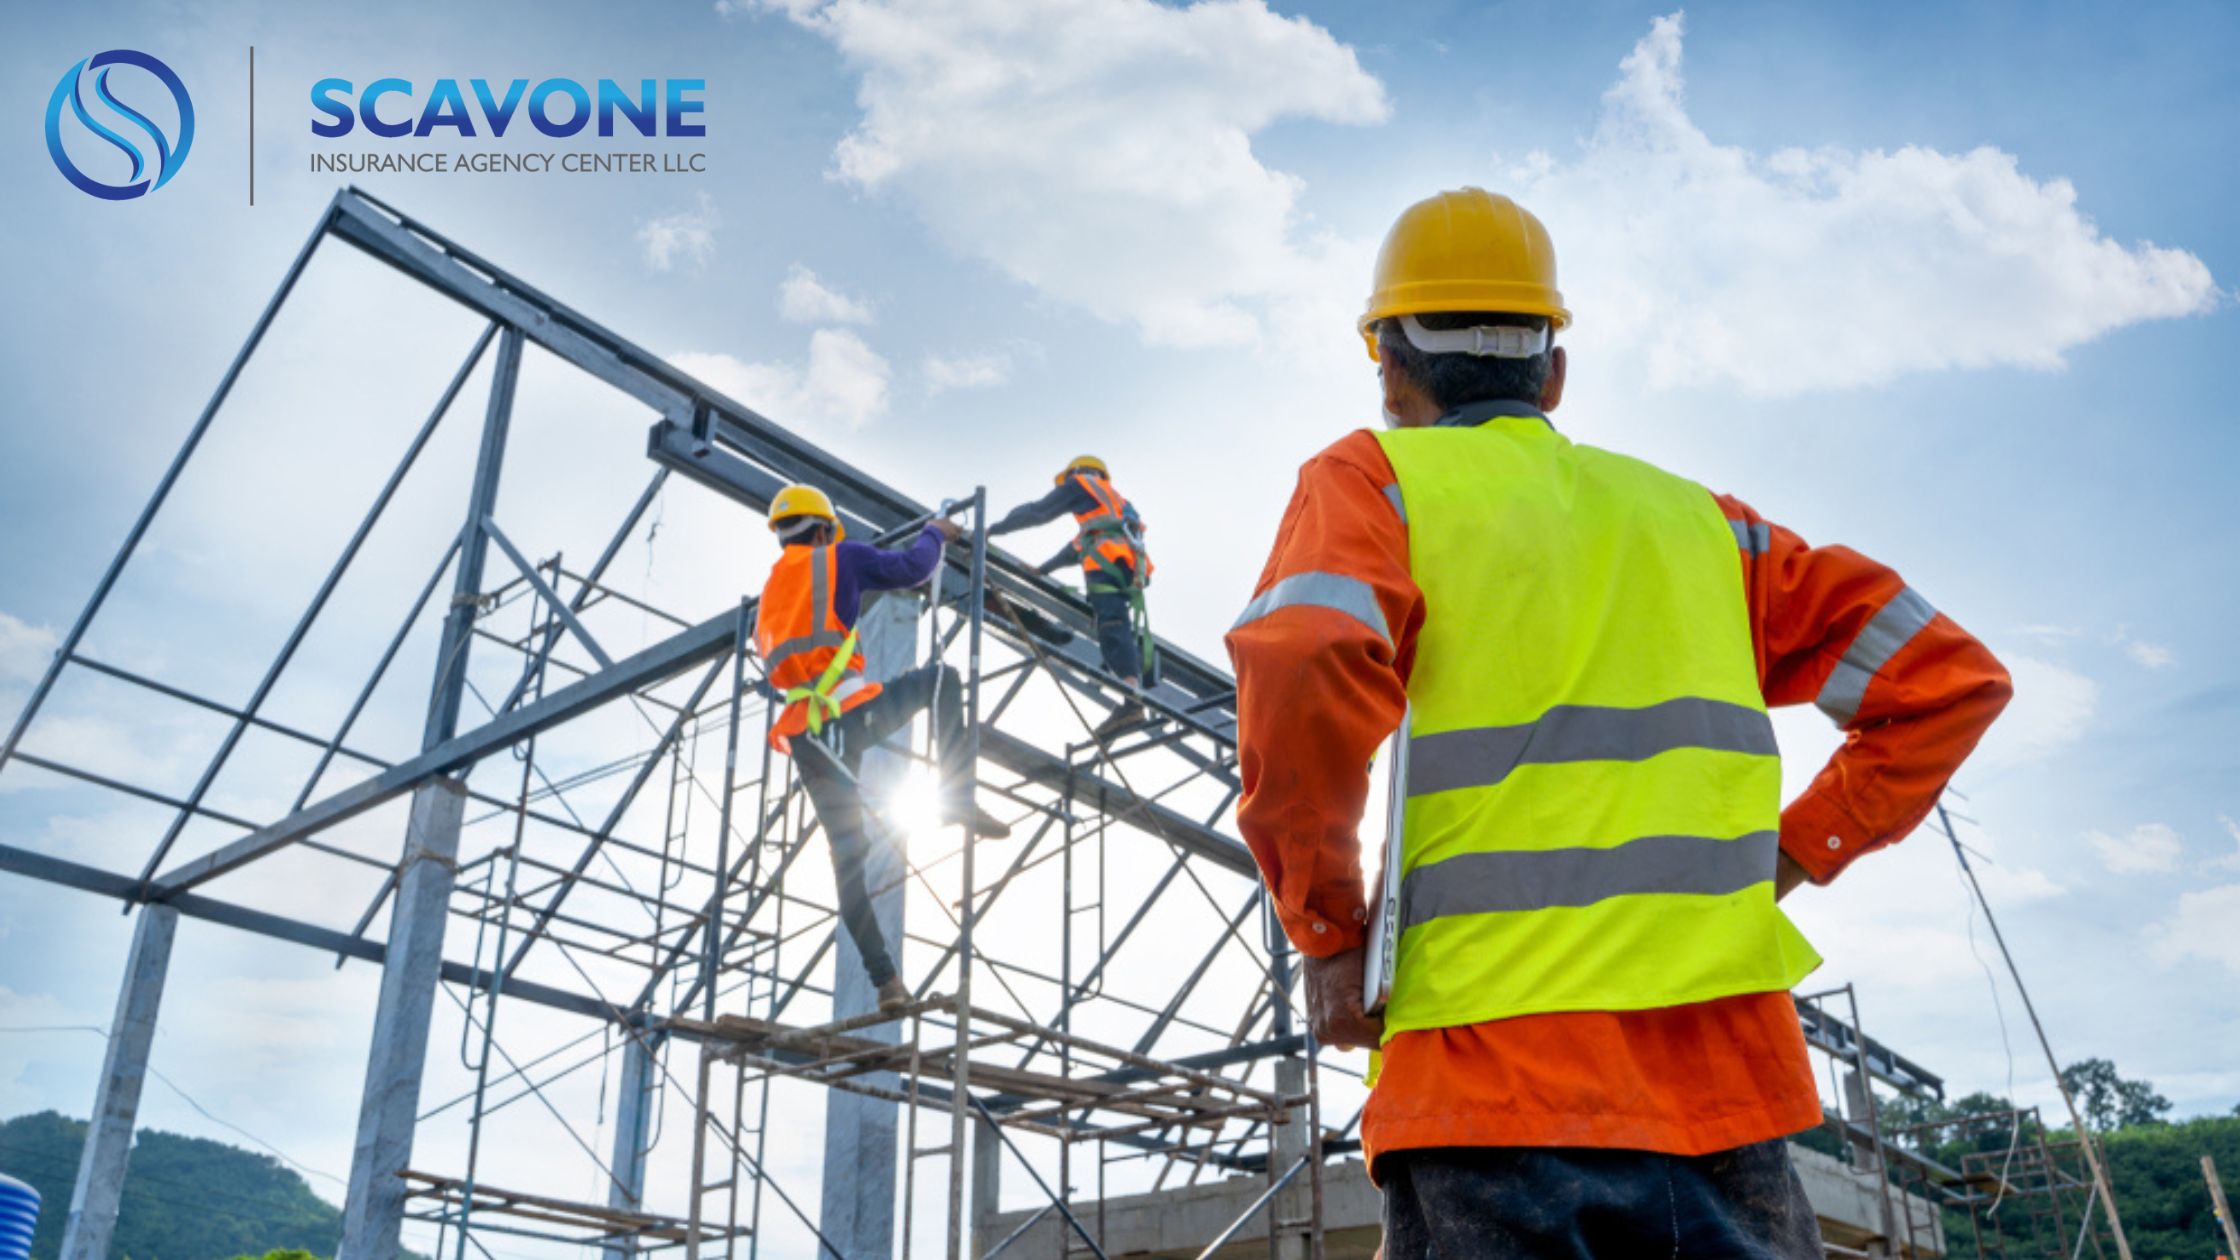 Contractor insurance coverage for construction defect